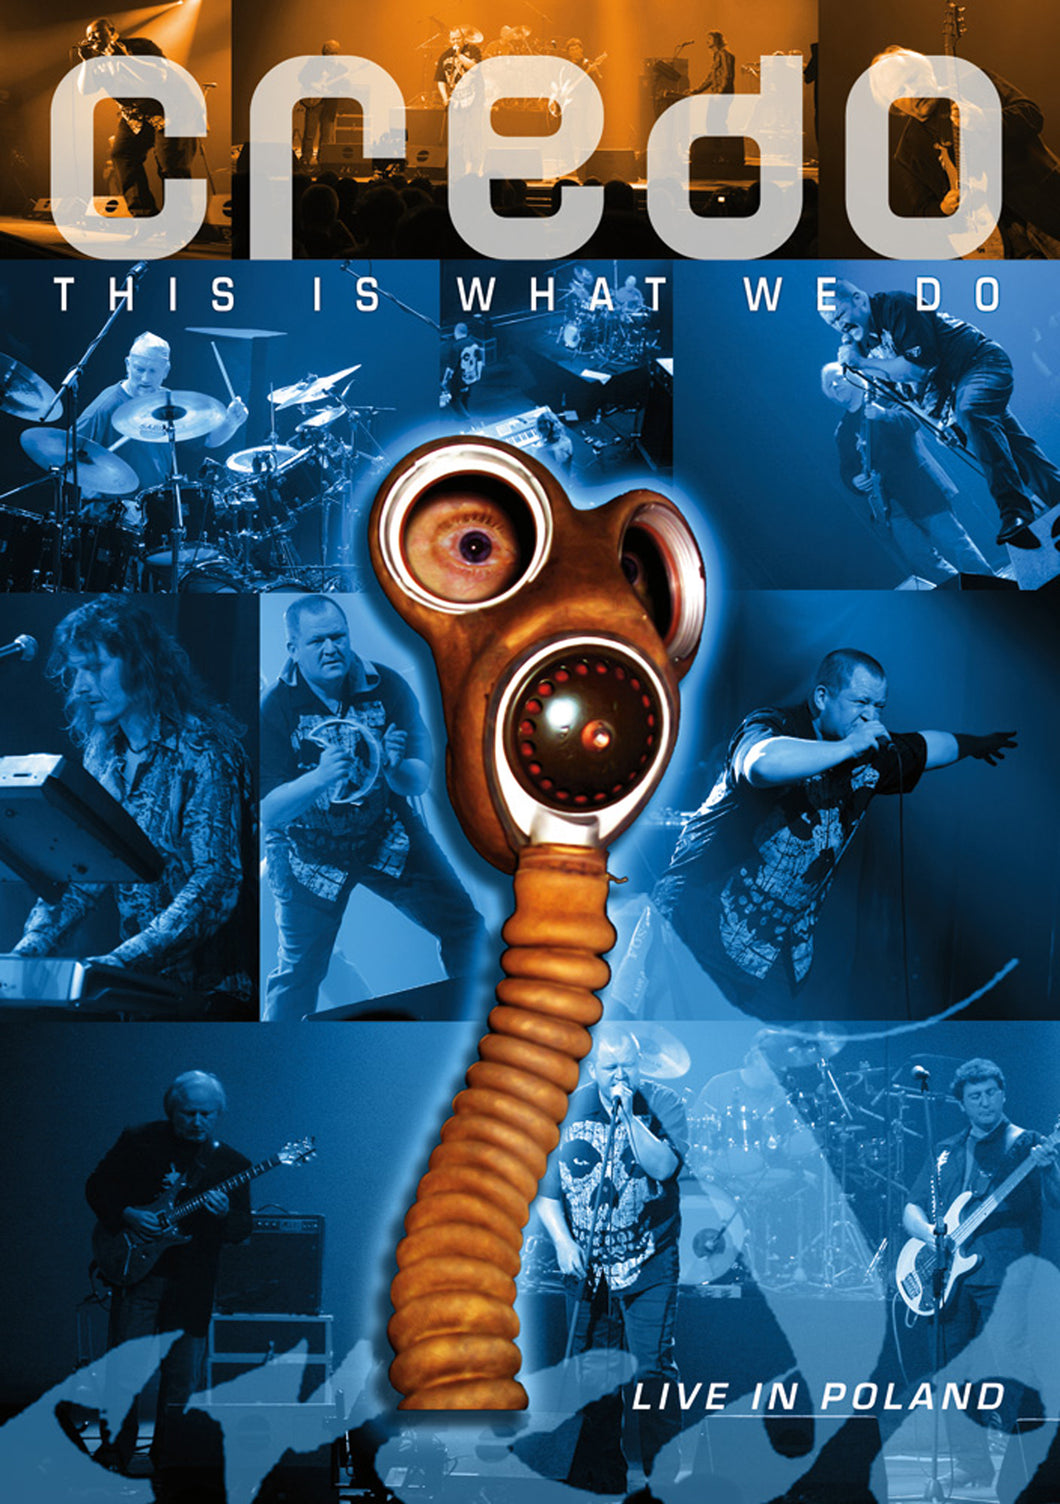 Credo - This Is What We Do: Live In Poland (Ltd. Edition) (DVD/CD)